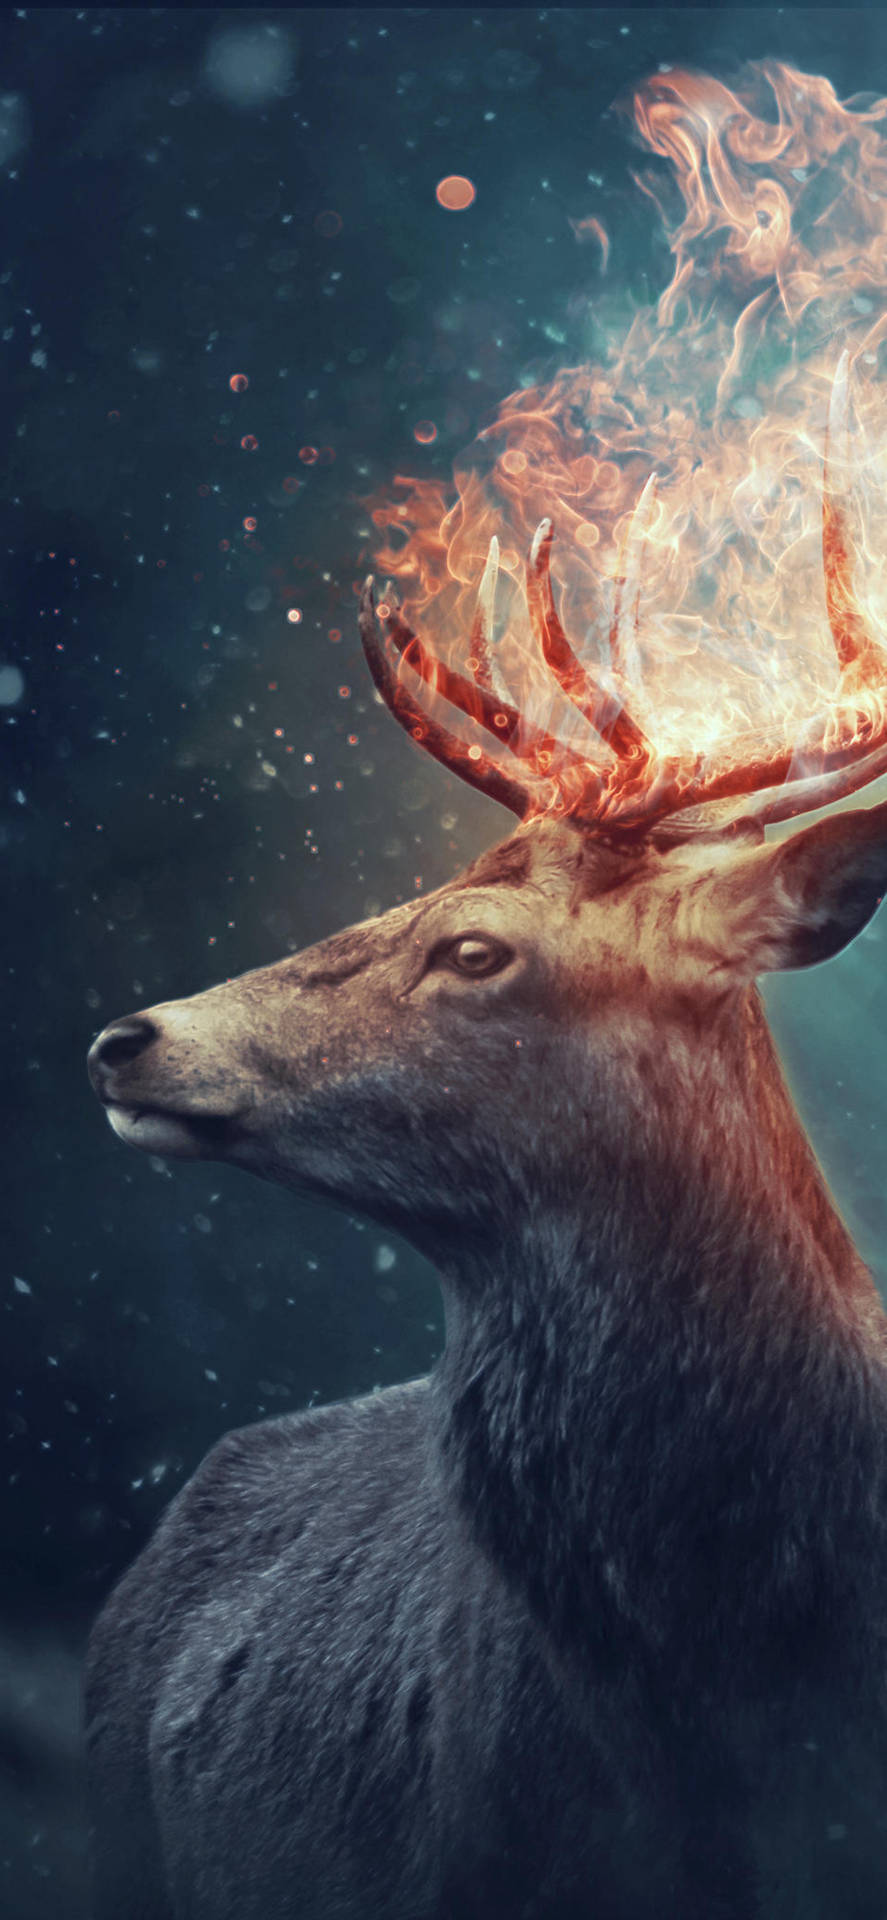 A Deer With Fire On Its Head Wallpaper